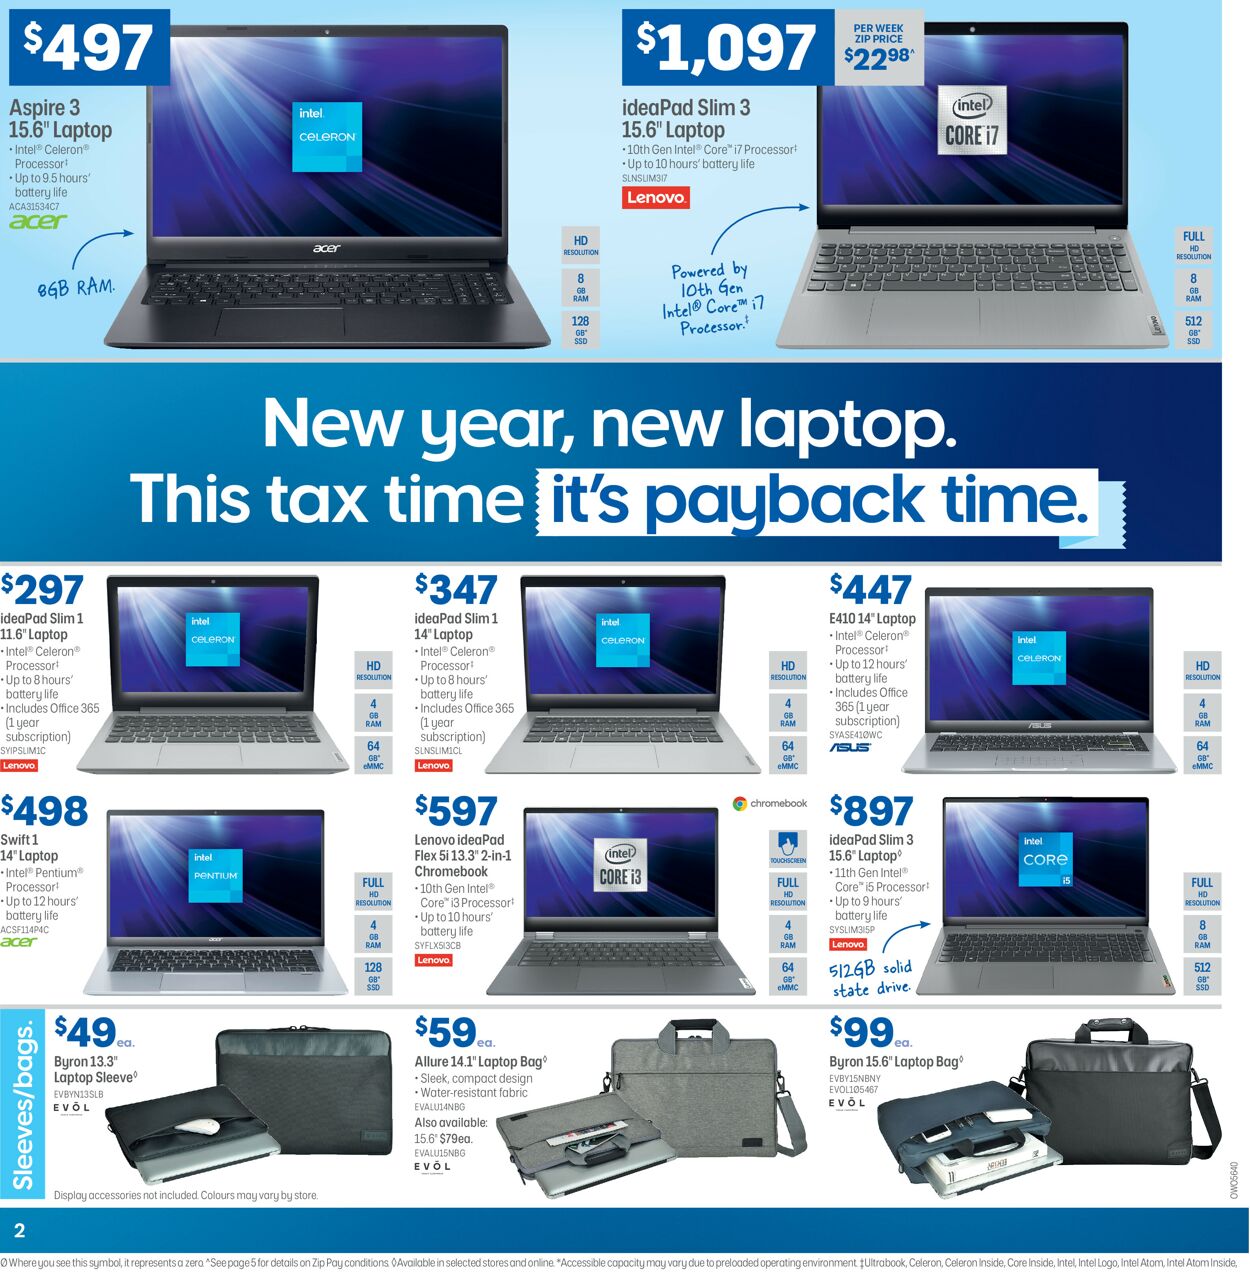 Catalogue Officeworks 07.06.2021 - 30.06.2021